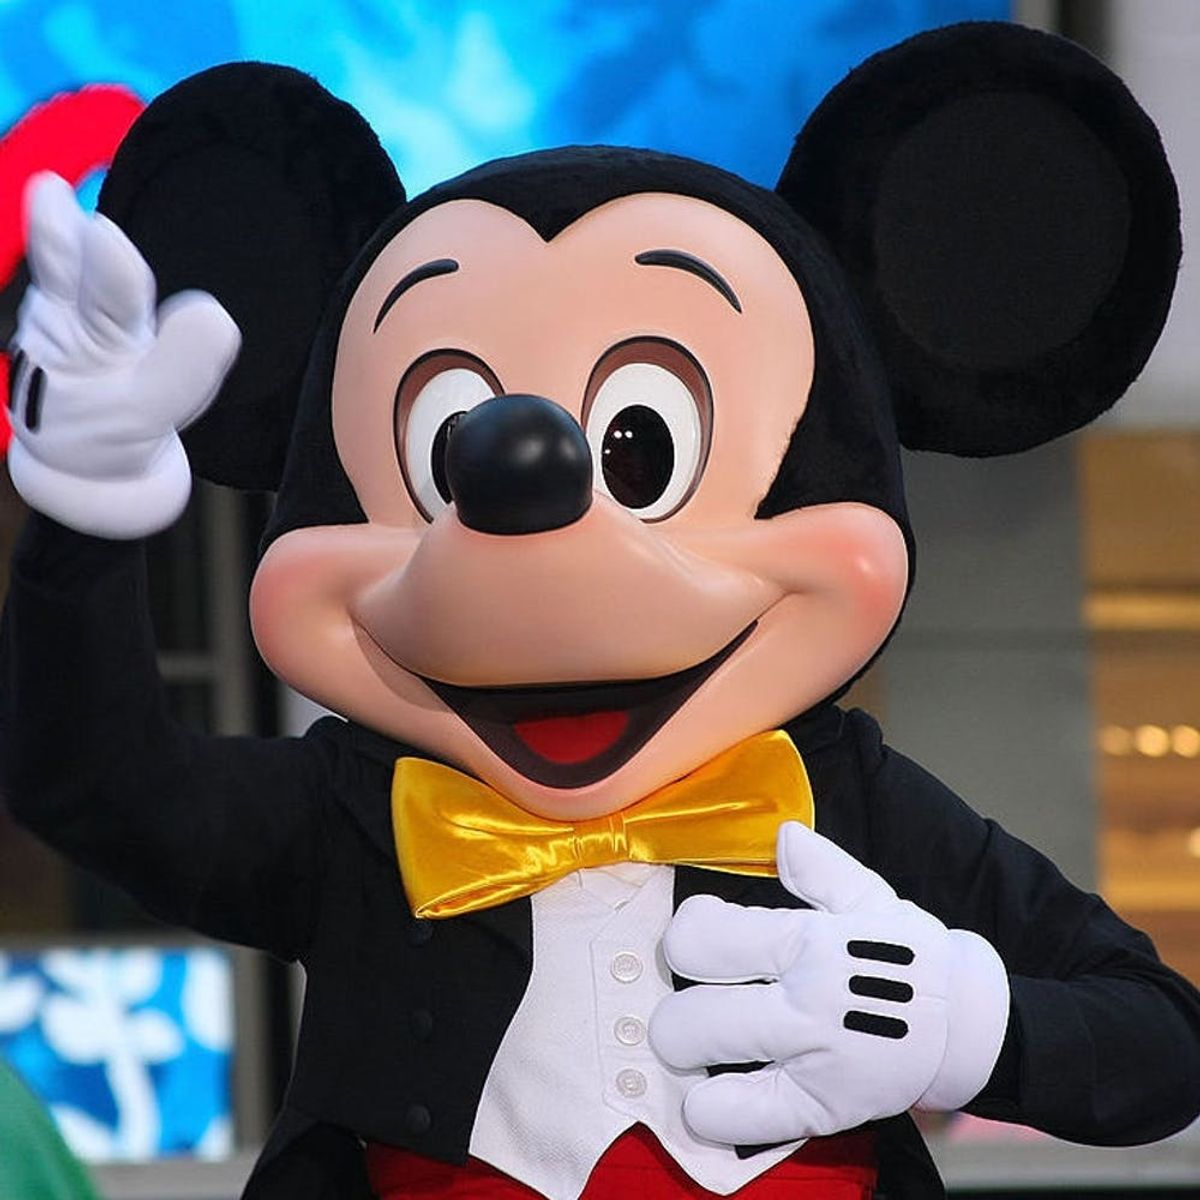 Mickey Mouse Helps Foster Parents Surprise Kids With Adoption News in Touching Viral Video